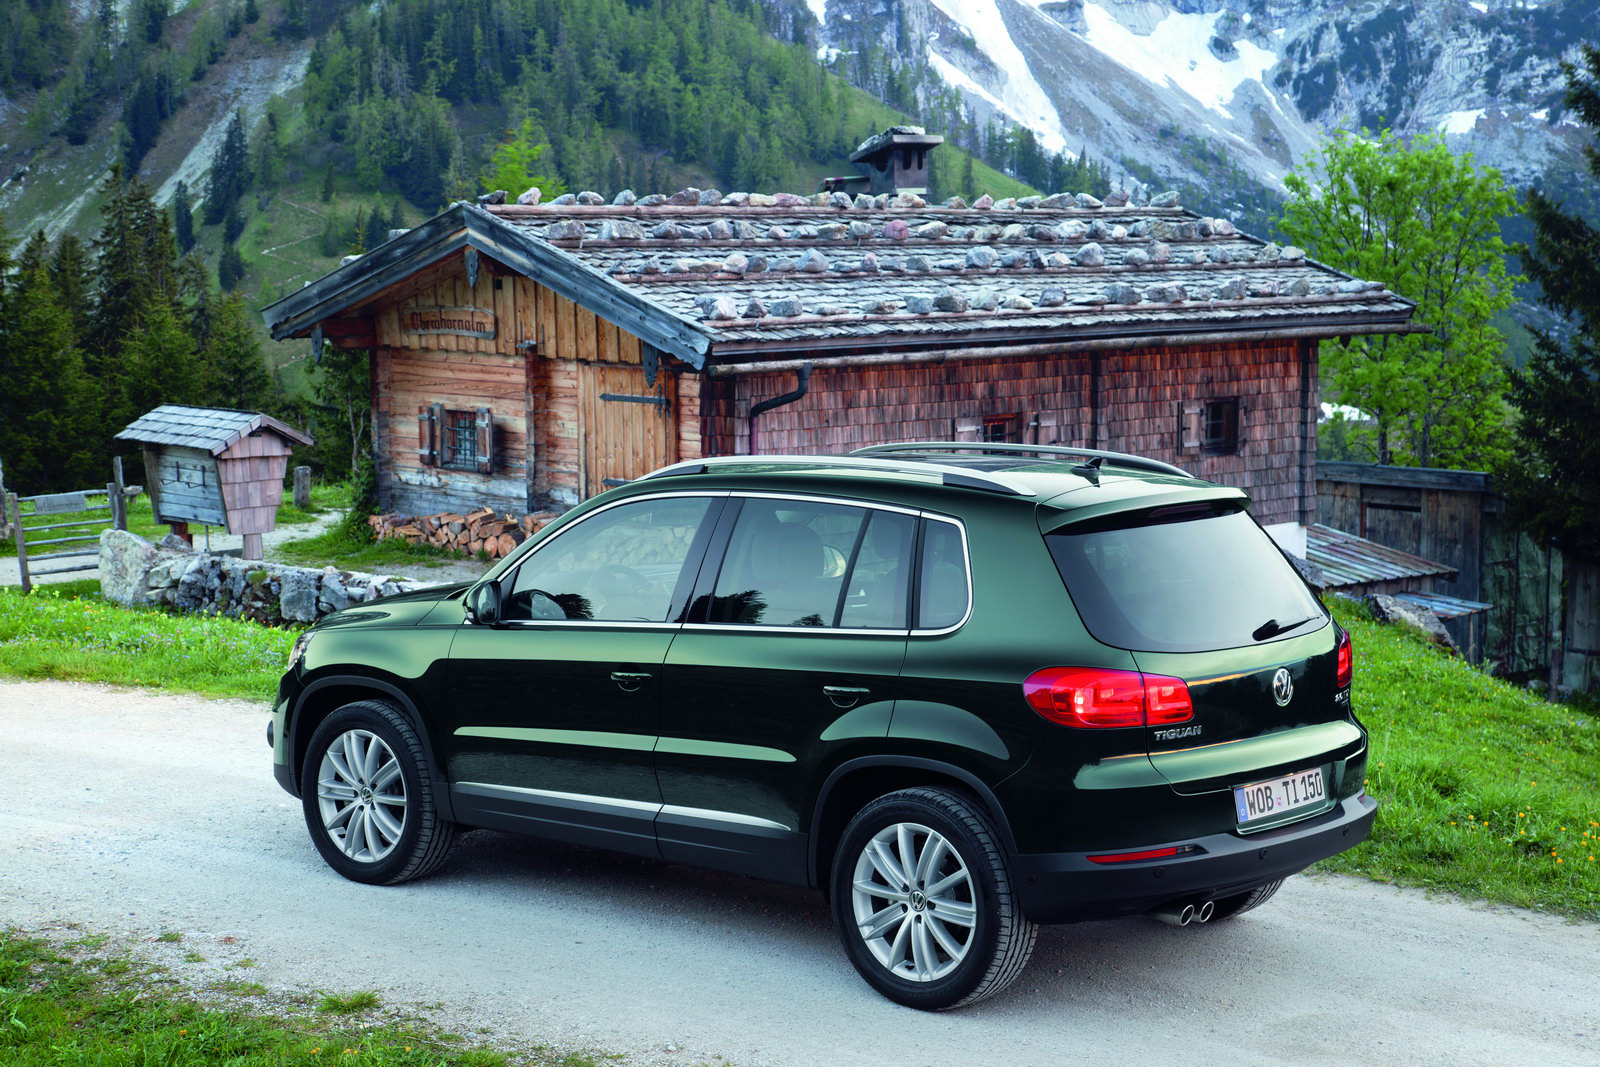 Volkswagen Studying Tiguan SUV Production in North America to Lower Costs | Carscoops1600 x 1067